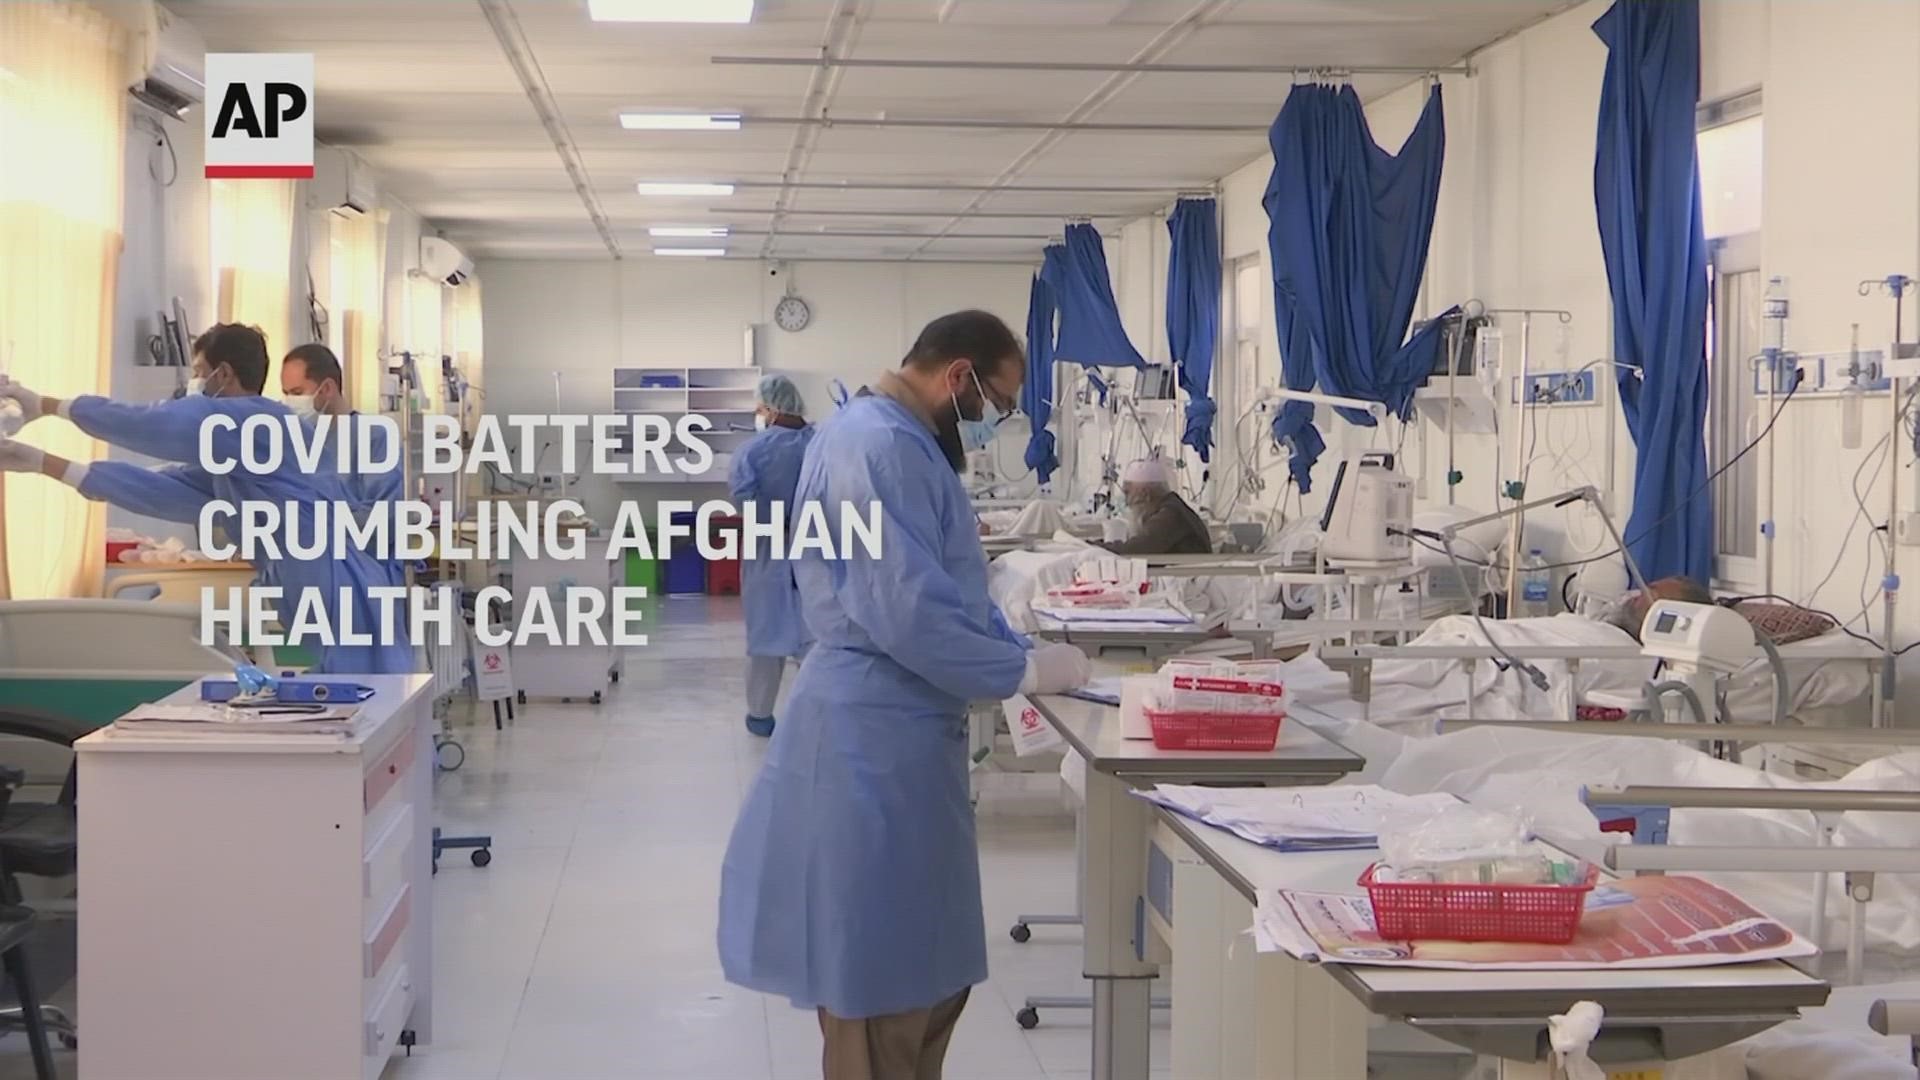 Afghans working in the few remaining hospitals face crumbling infrastructure and many have gone months without pay.